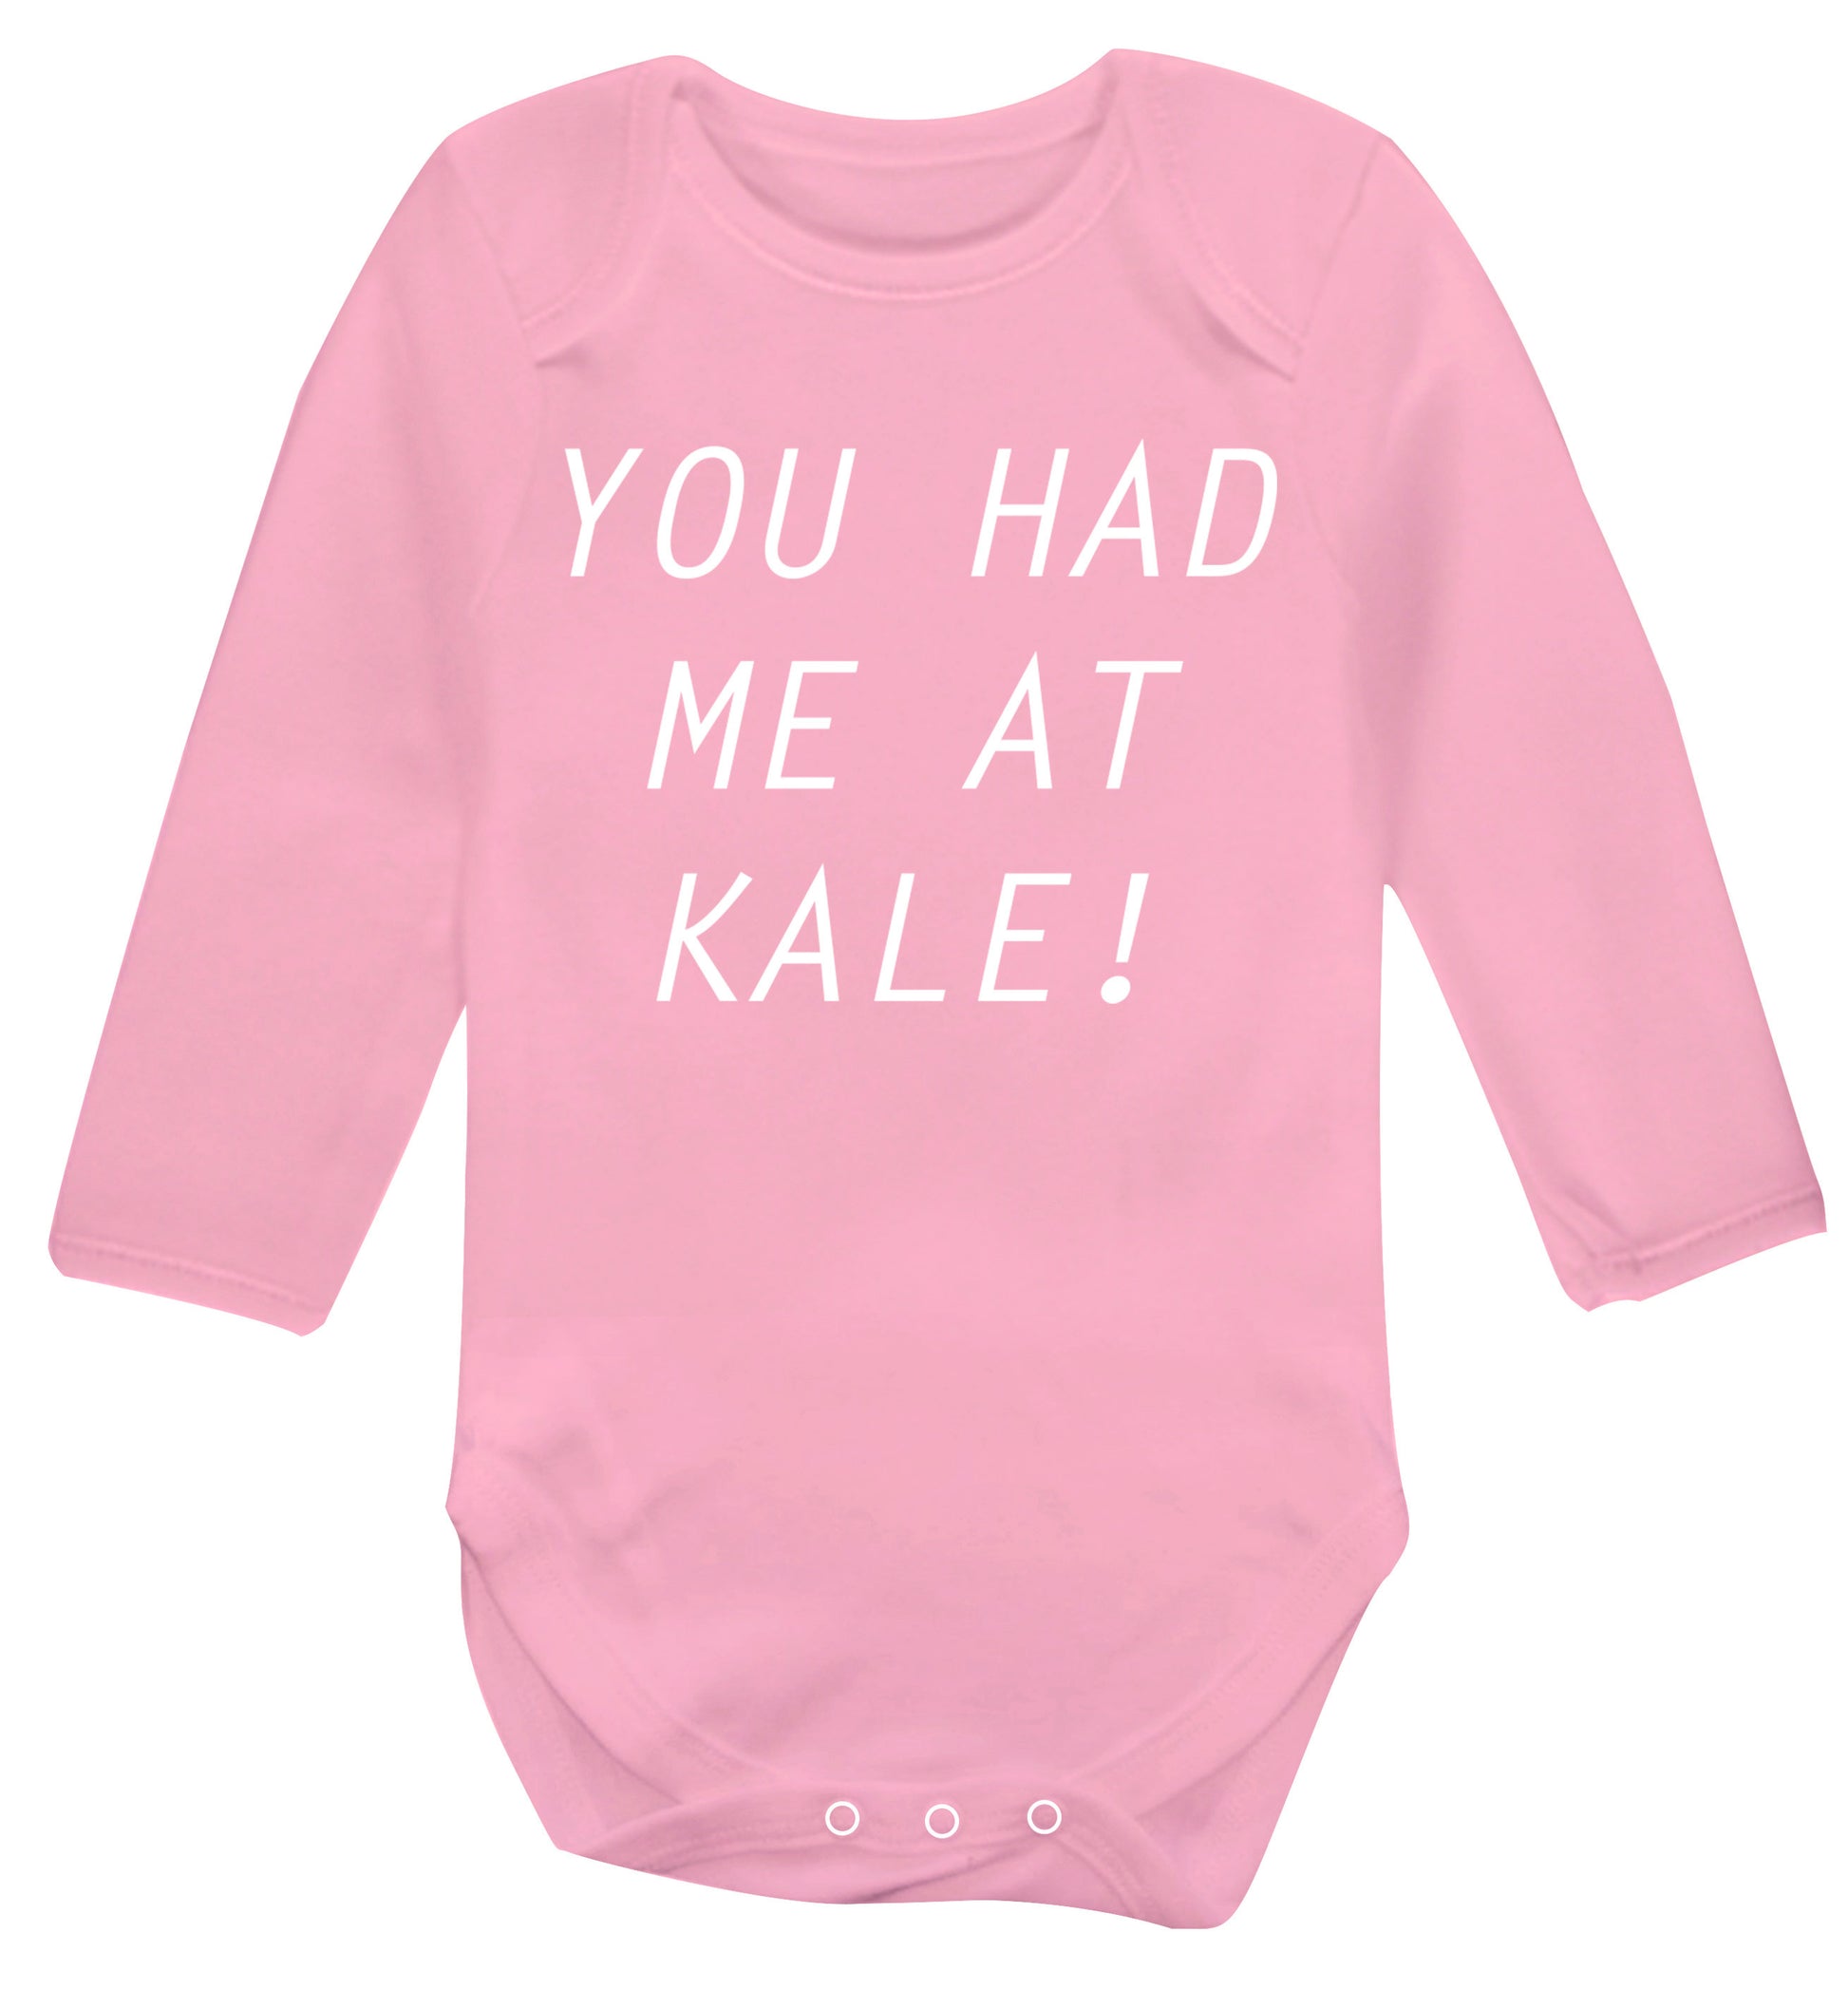 You had me at kale Baby Vest long sleeved pale pink 6-12 months